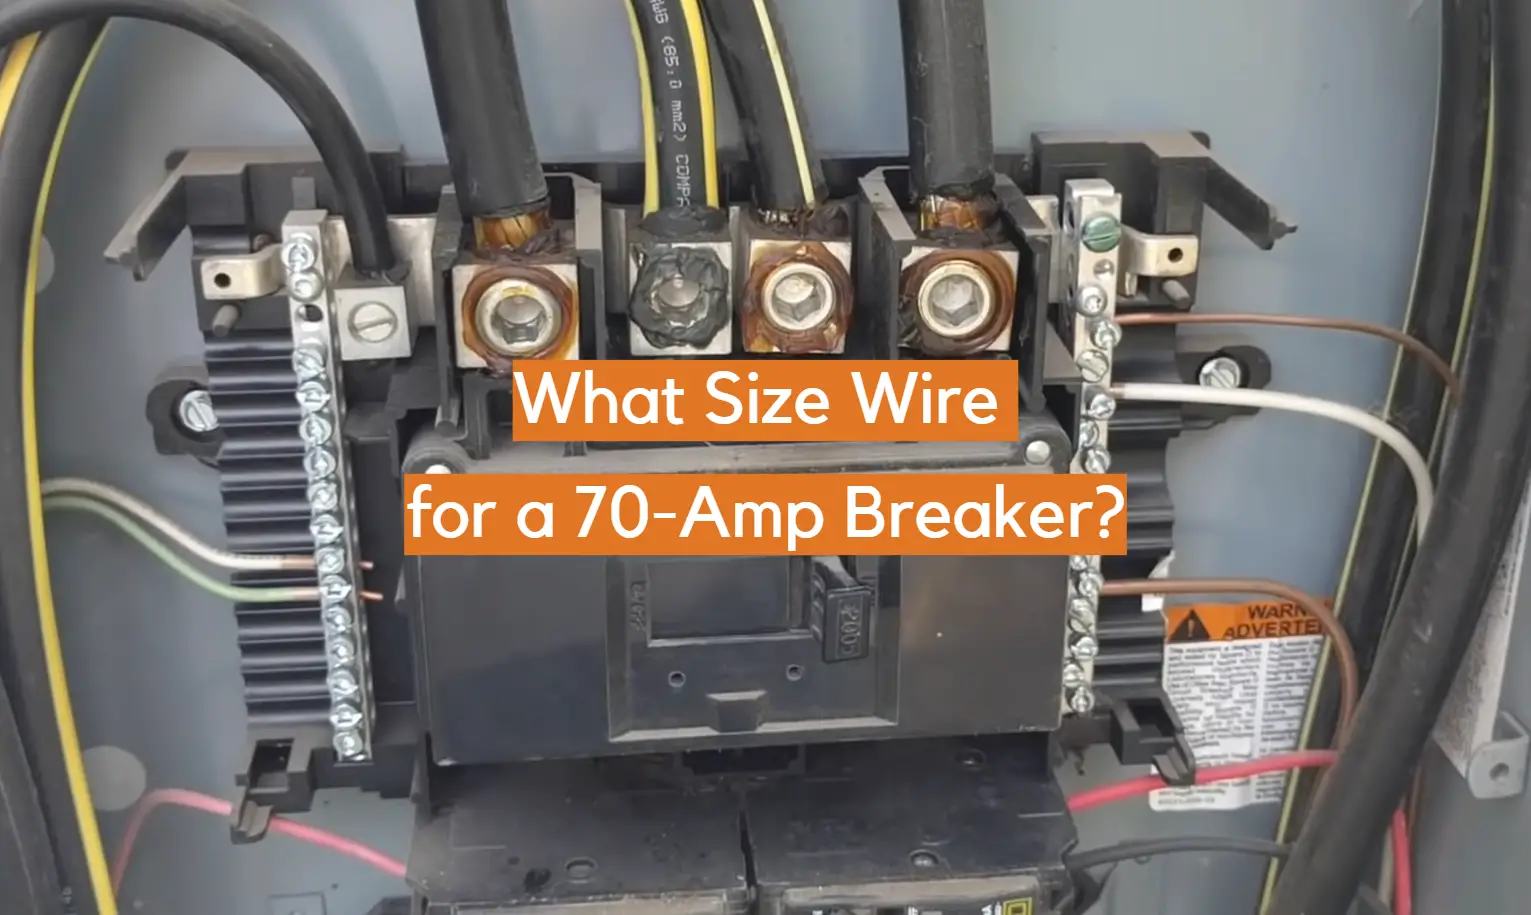 What Size Wire for a 70-Amp Breaker?